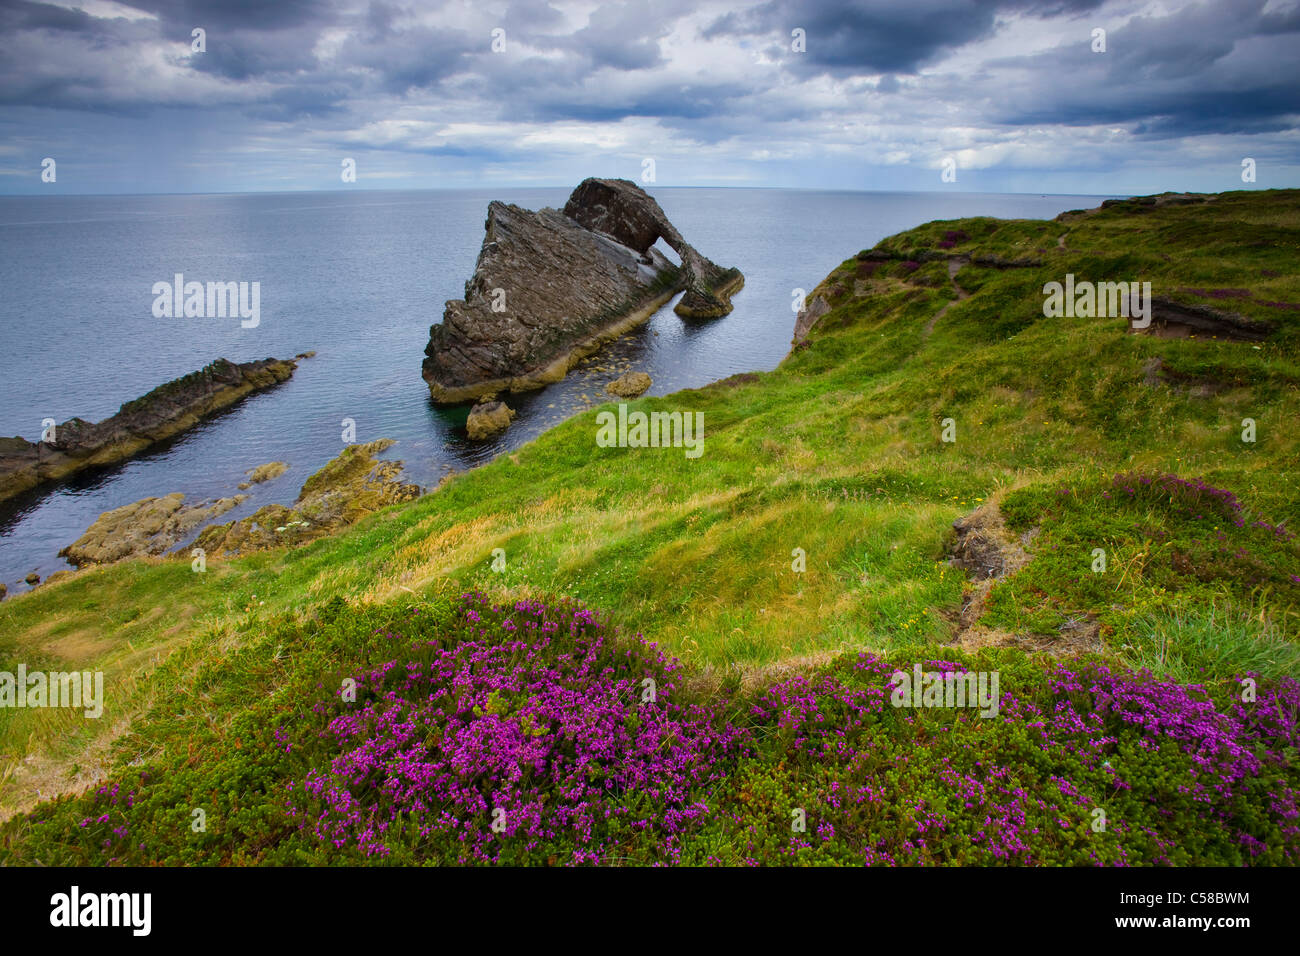 Bow Fiddle rock, skirt, Great Britain, Scotland, Europe, sea, coast, cliff coast, cliff forms, cliff curves, meadow, moor plants Stock Photo